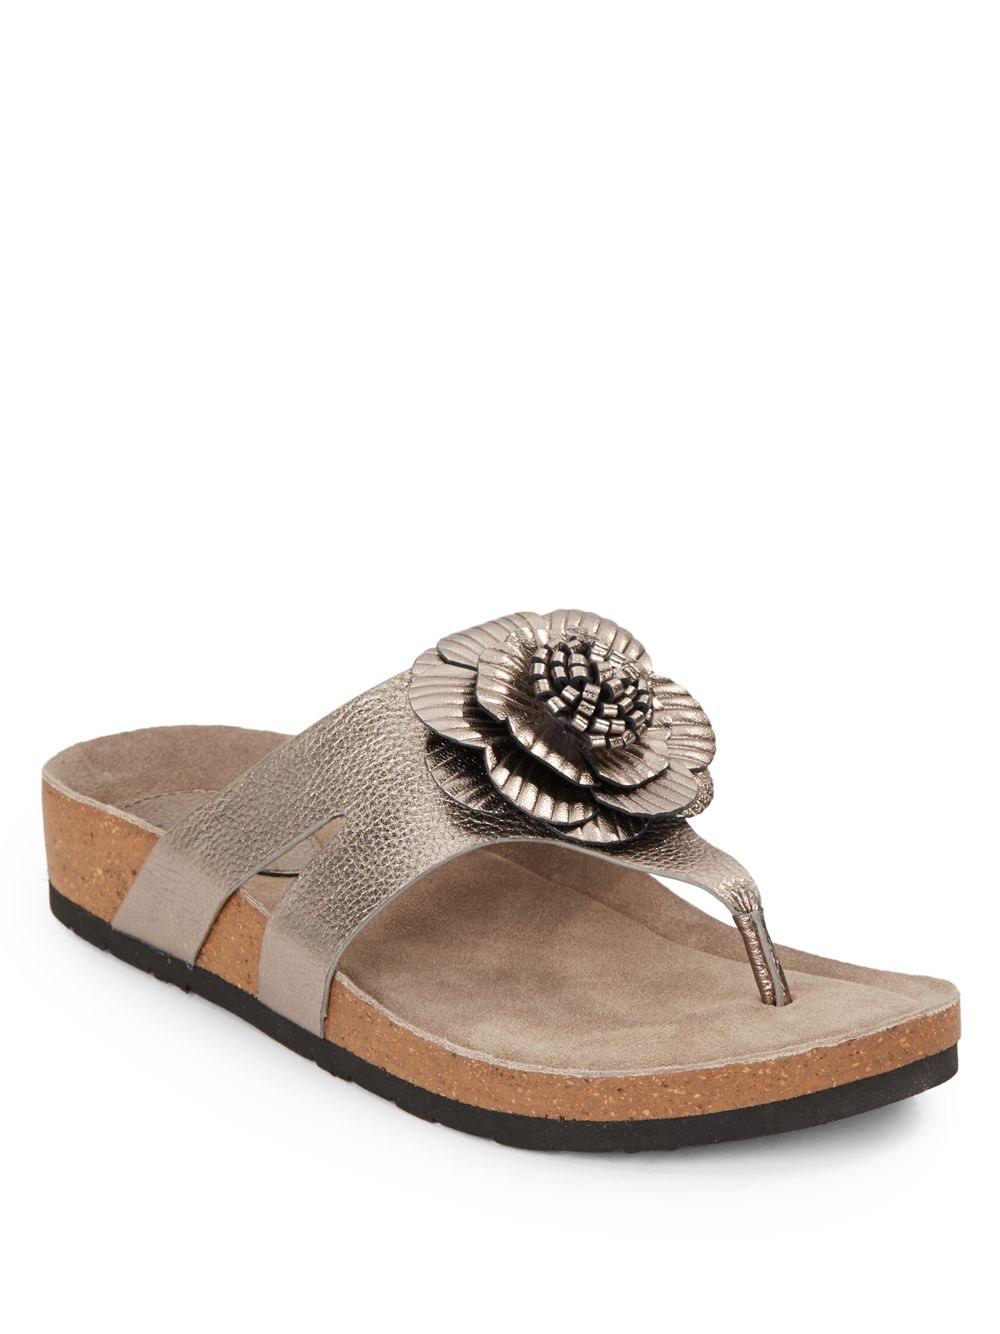 Gray Beda Metallic Leather Floral Thong Sandals